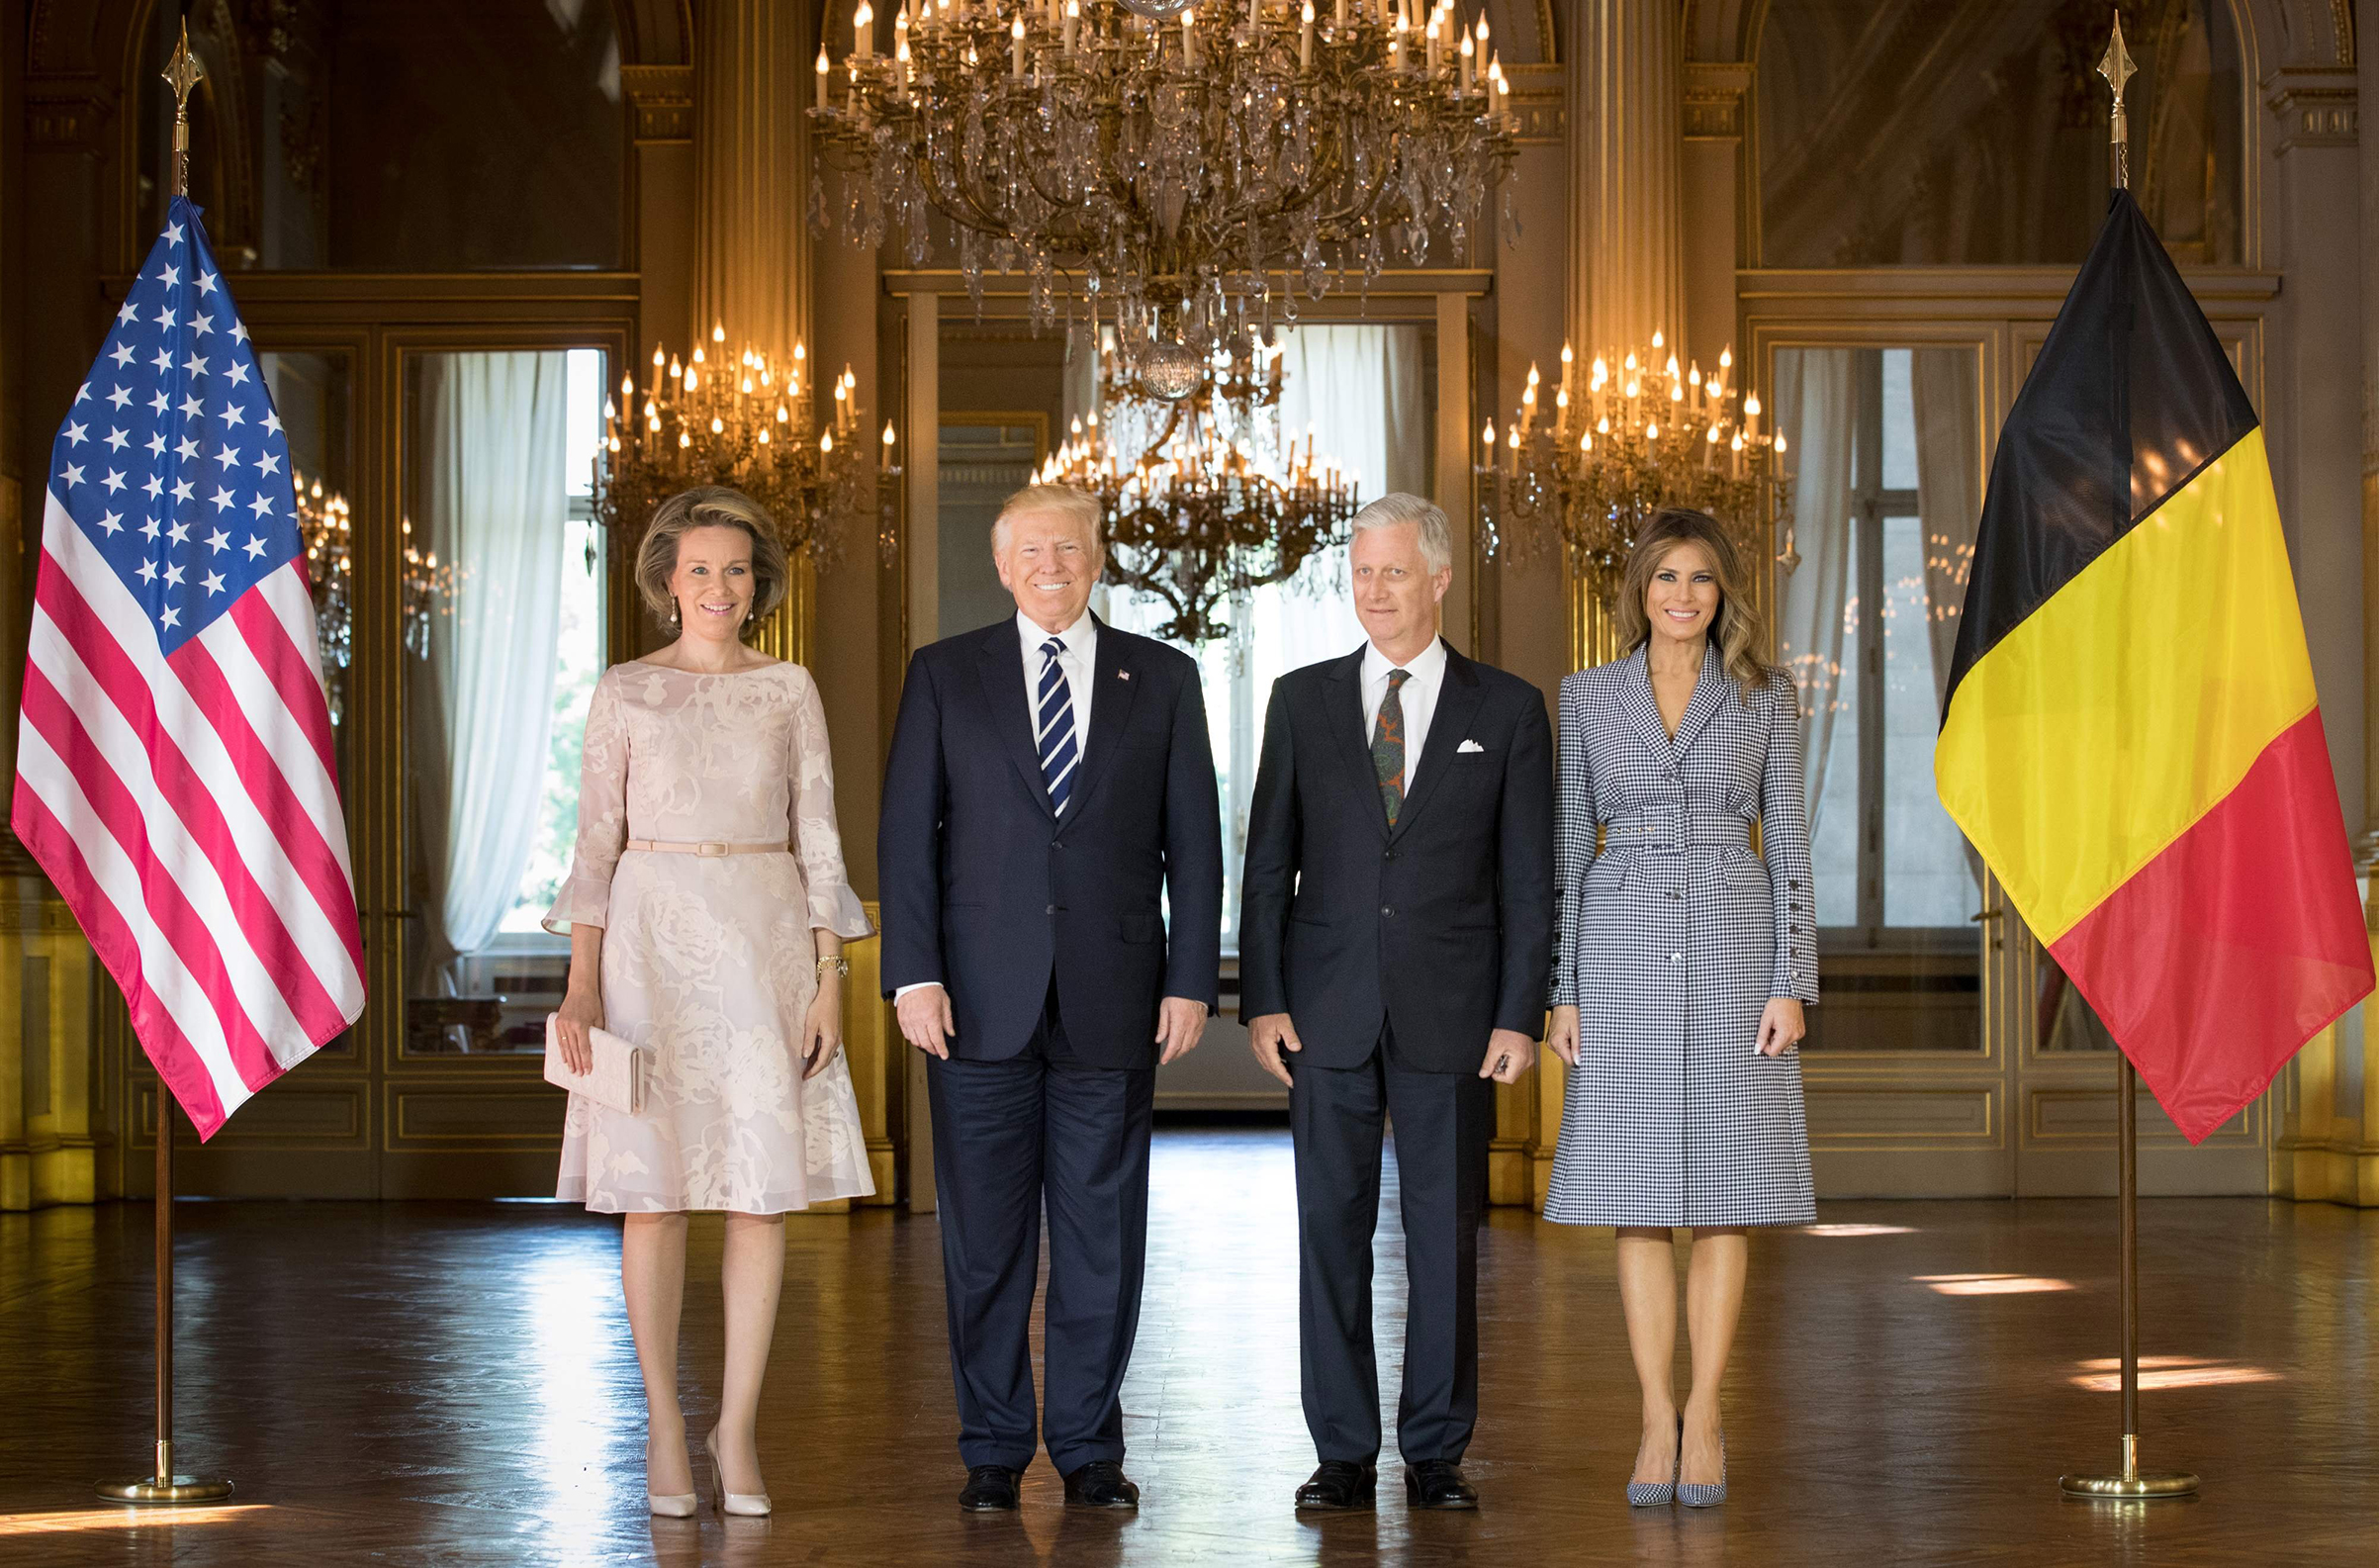 Queen Mathilde and King Philippe of Belgium pose prior to a reception at the Royal Palace in Belgium on May 24, 2017.